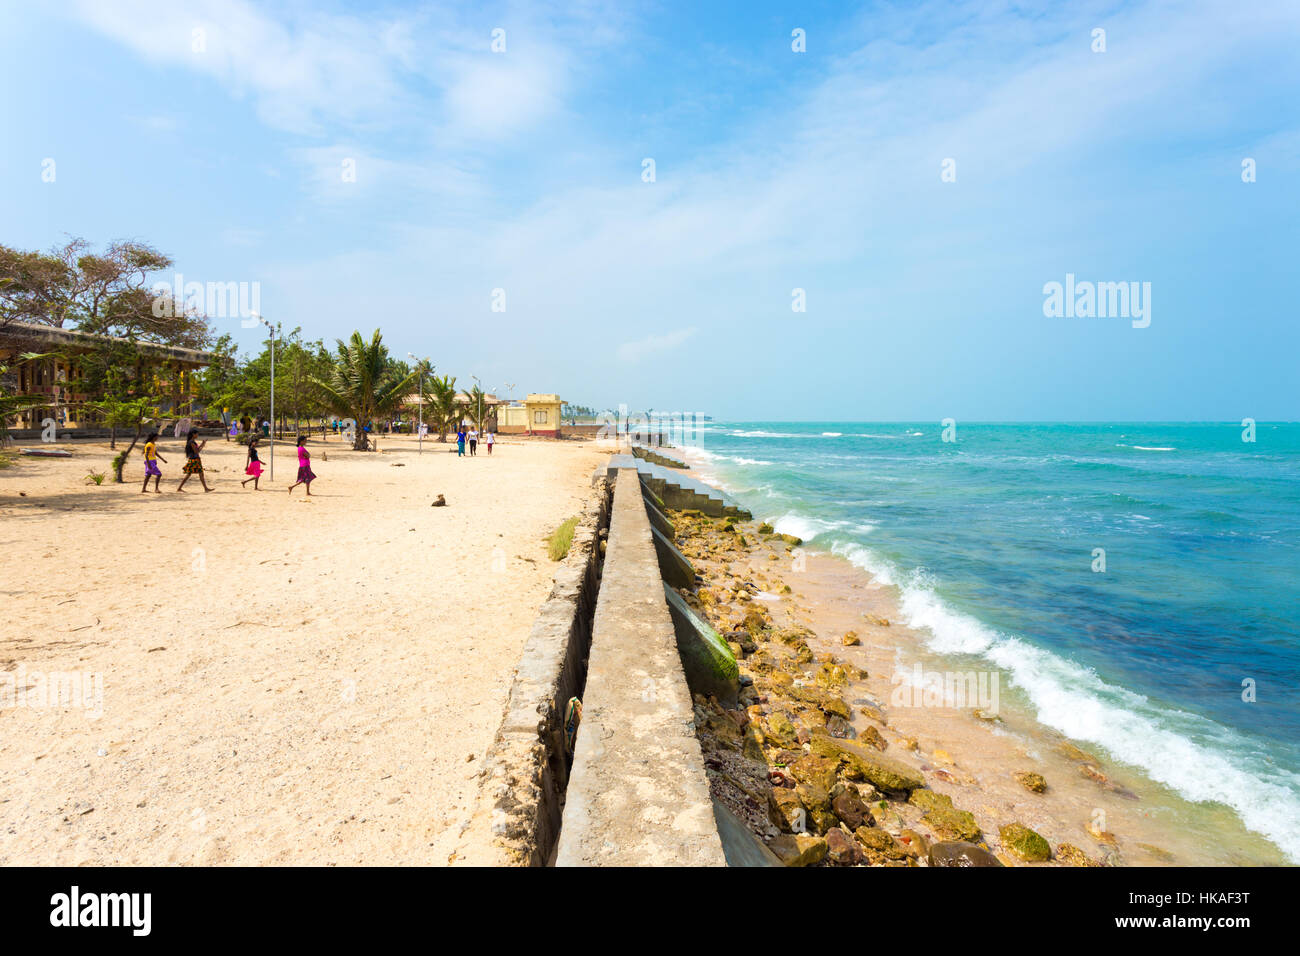 Tourists walking on the beach in view of the ocean adjacent to Keerimalai Hot Springs on a sunny day, northern coast of Jaffna Stock Photo